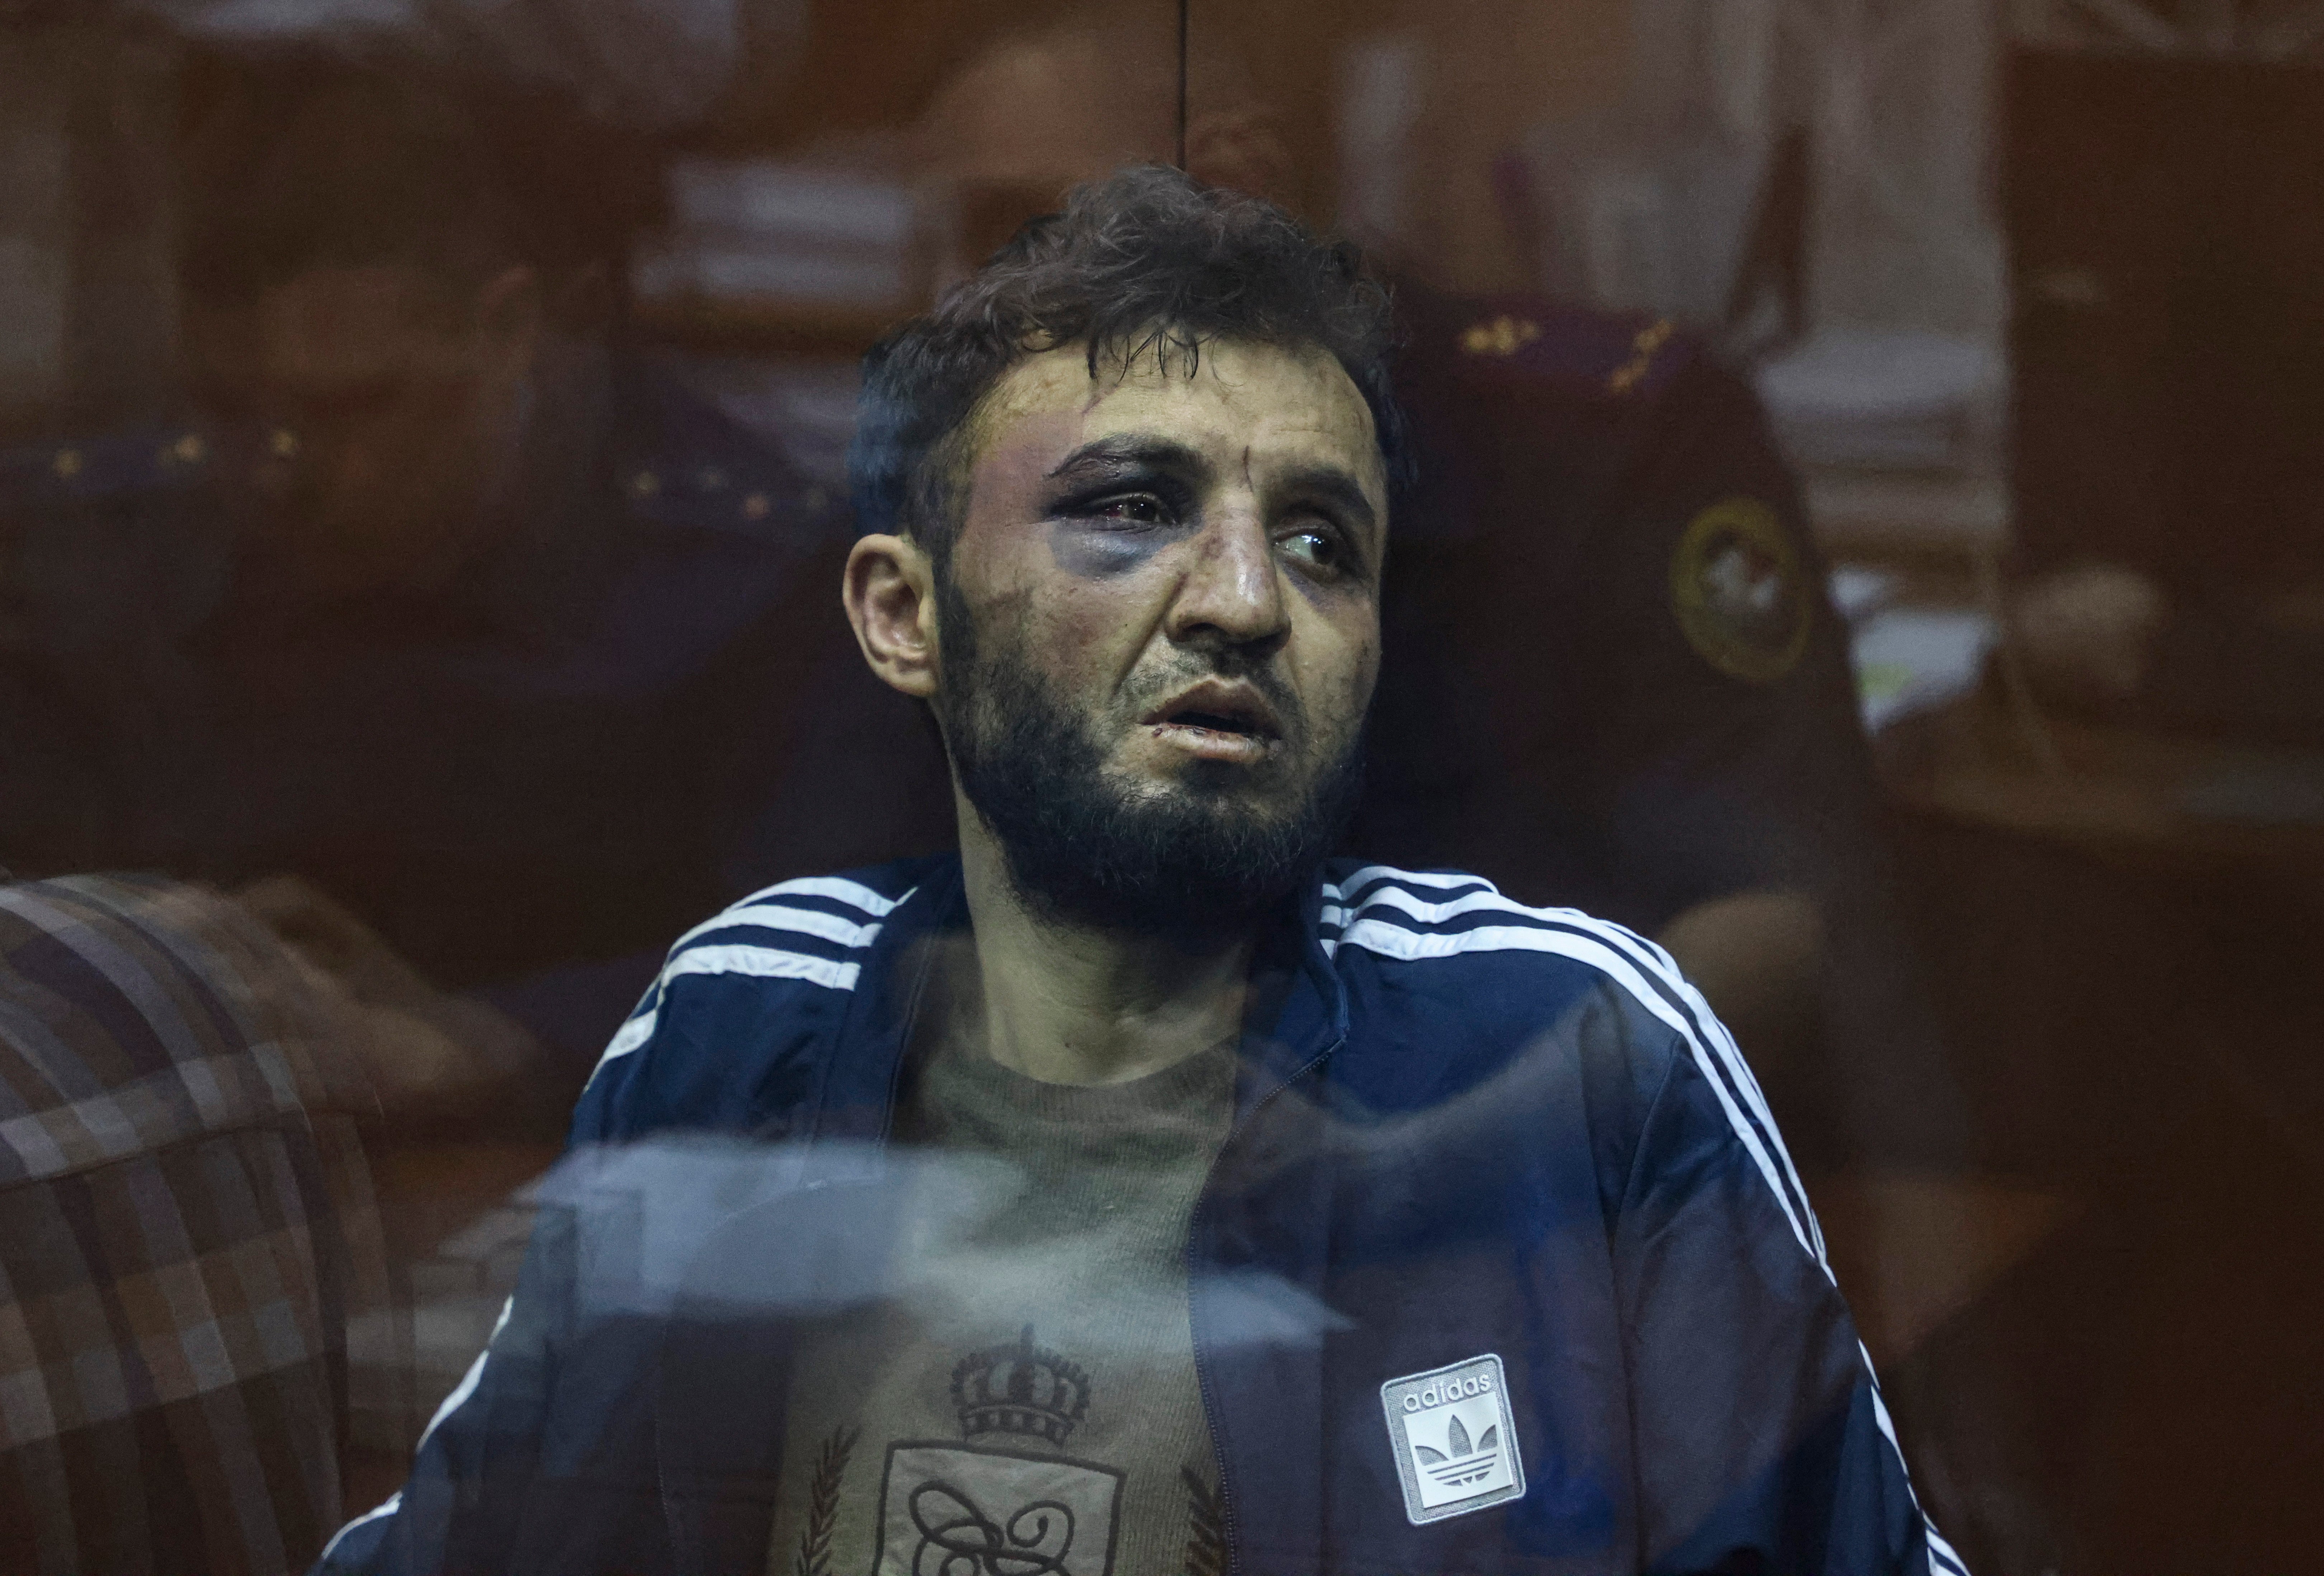 

<p>Dalerdzhon Mirzoyev, a suspect in the shooting attack at the Crocus City Hall concert venue, sits behind a glass wall of an enclosure for defendants at the Basmanny district court in Moscow </p>
<p>” height=”4394″ width=”6480″ layout=”responsive” i-amphtml-layout=”responsive”><i-amphtml-sizer slot=